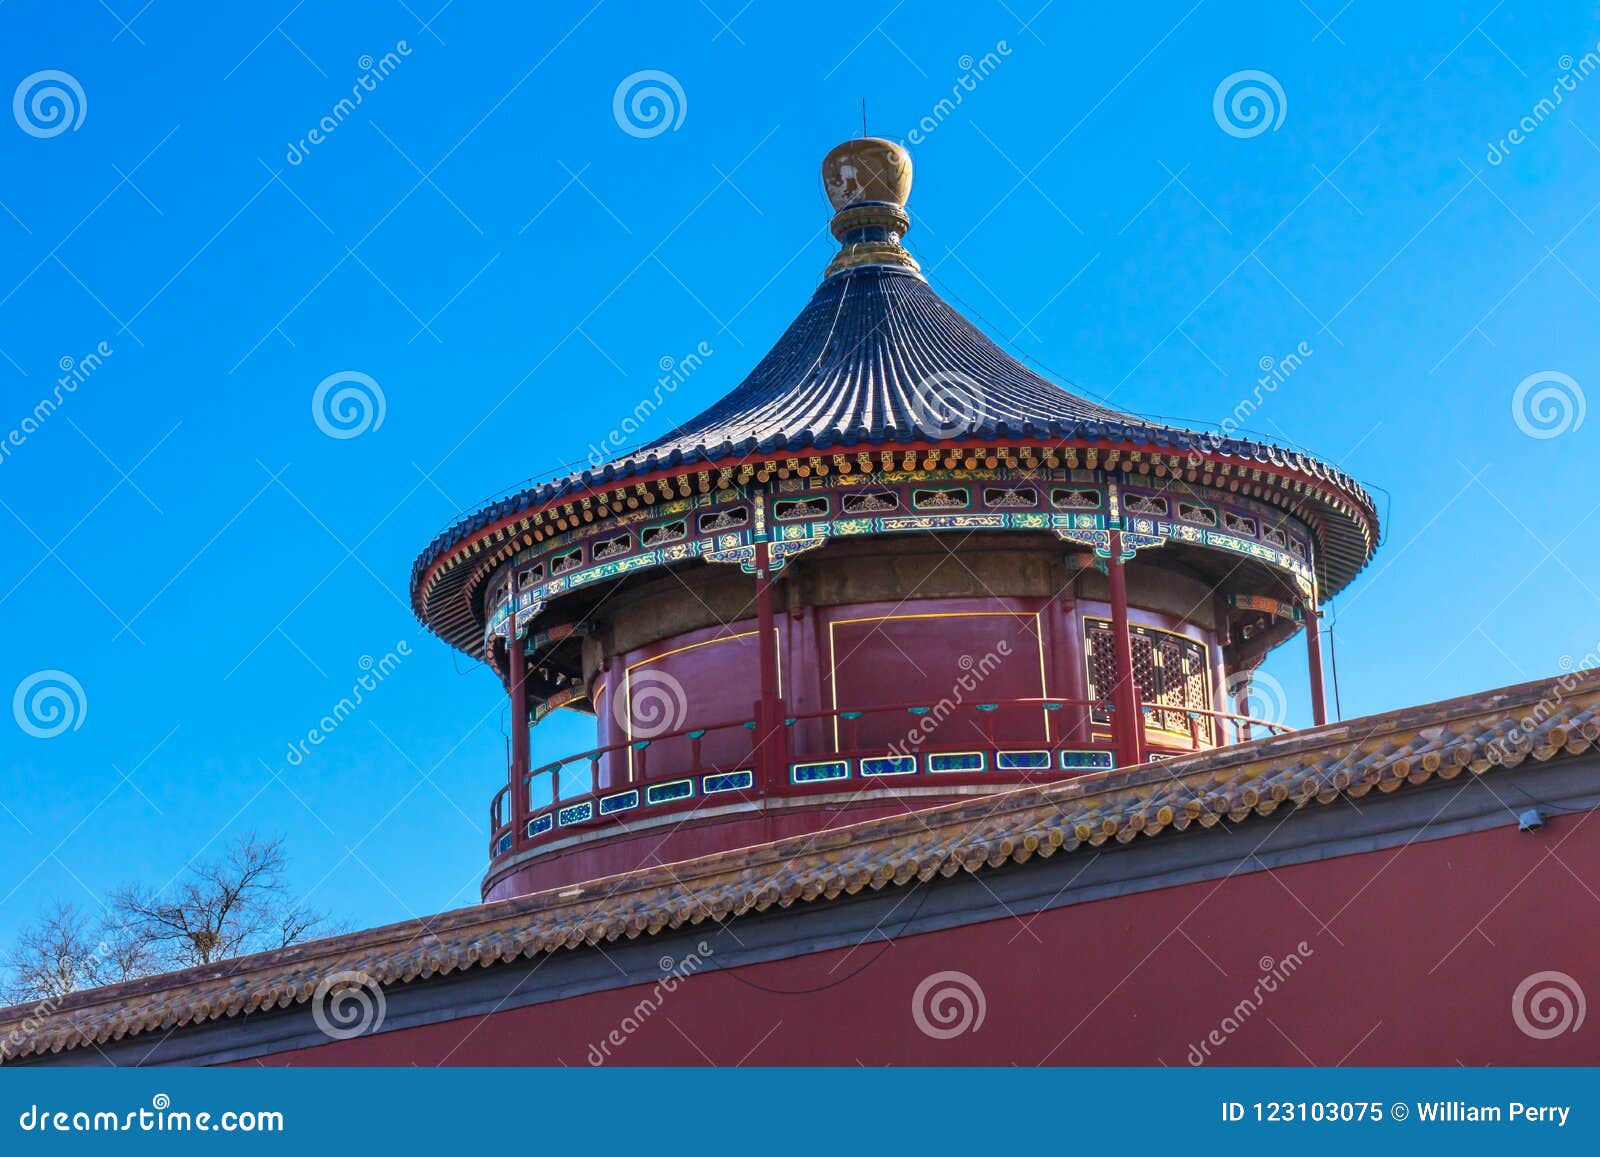 red pavilion tower wall jingshan park beijing china